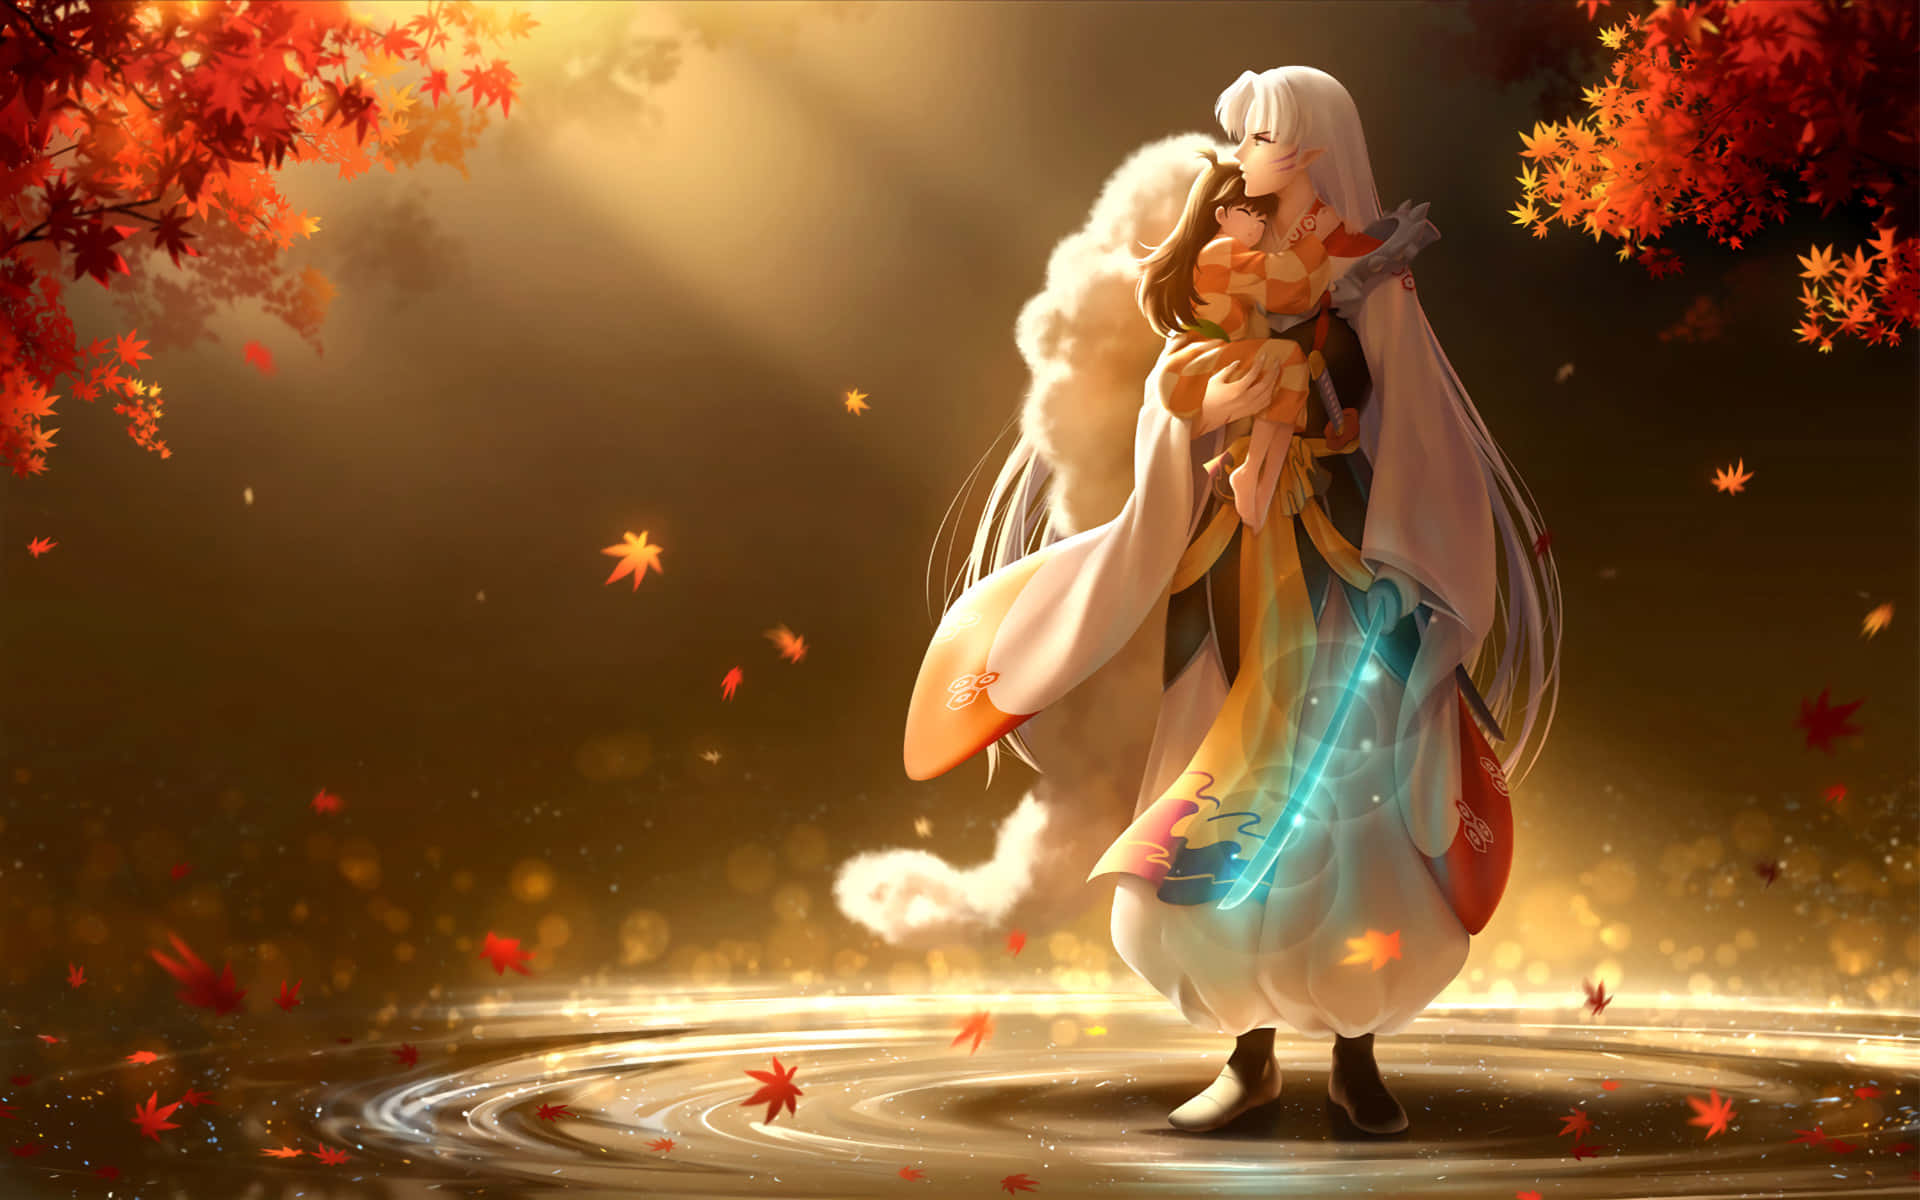 The Fearless Lord Sesshomaru in a Powerful Stance Wallpaper